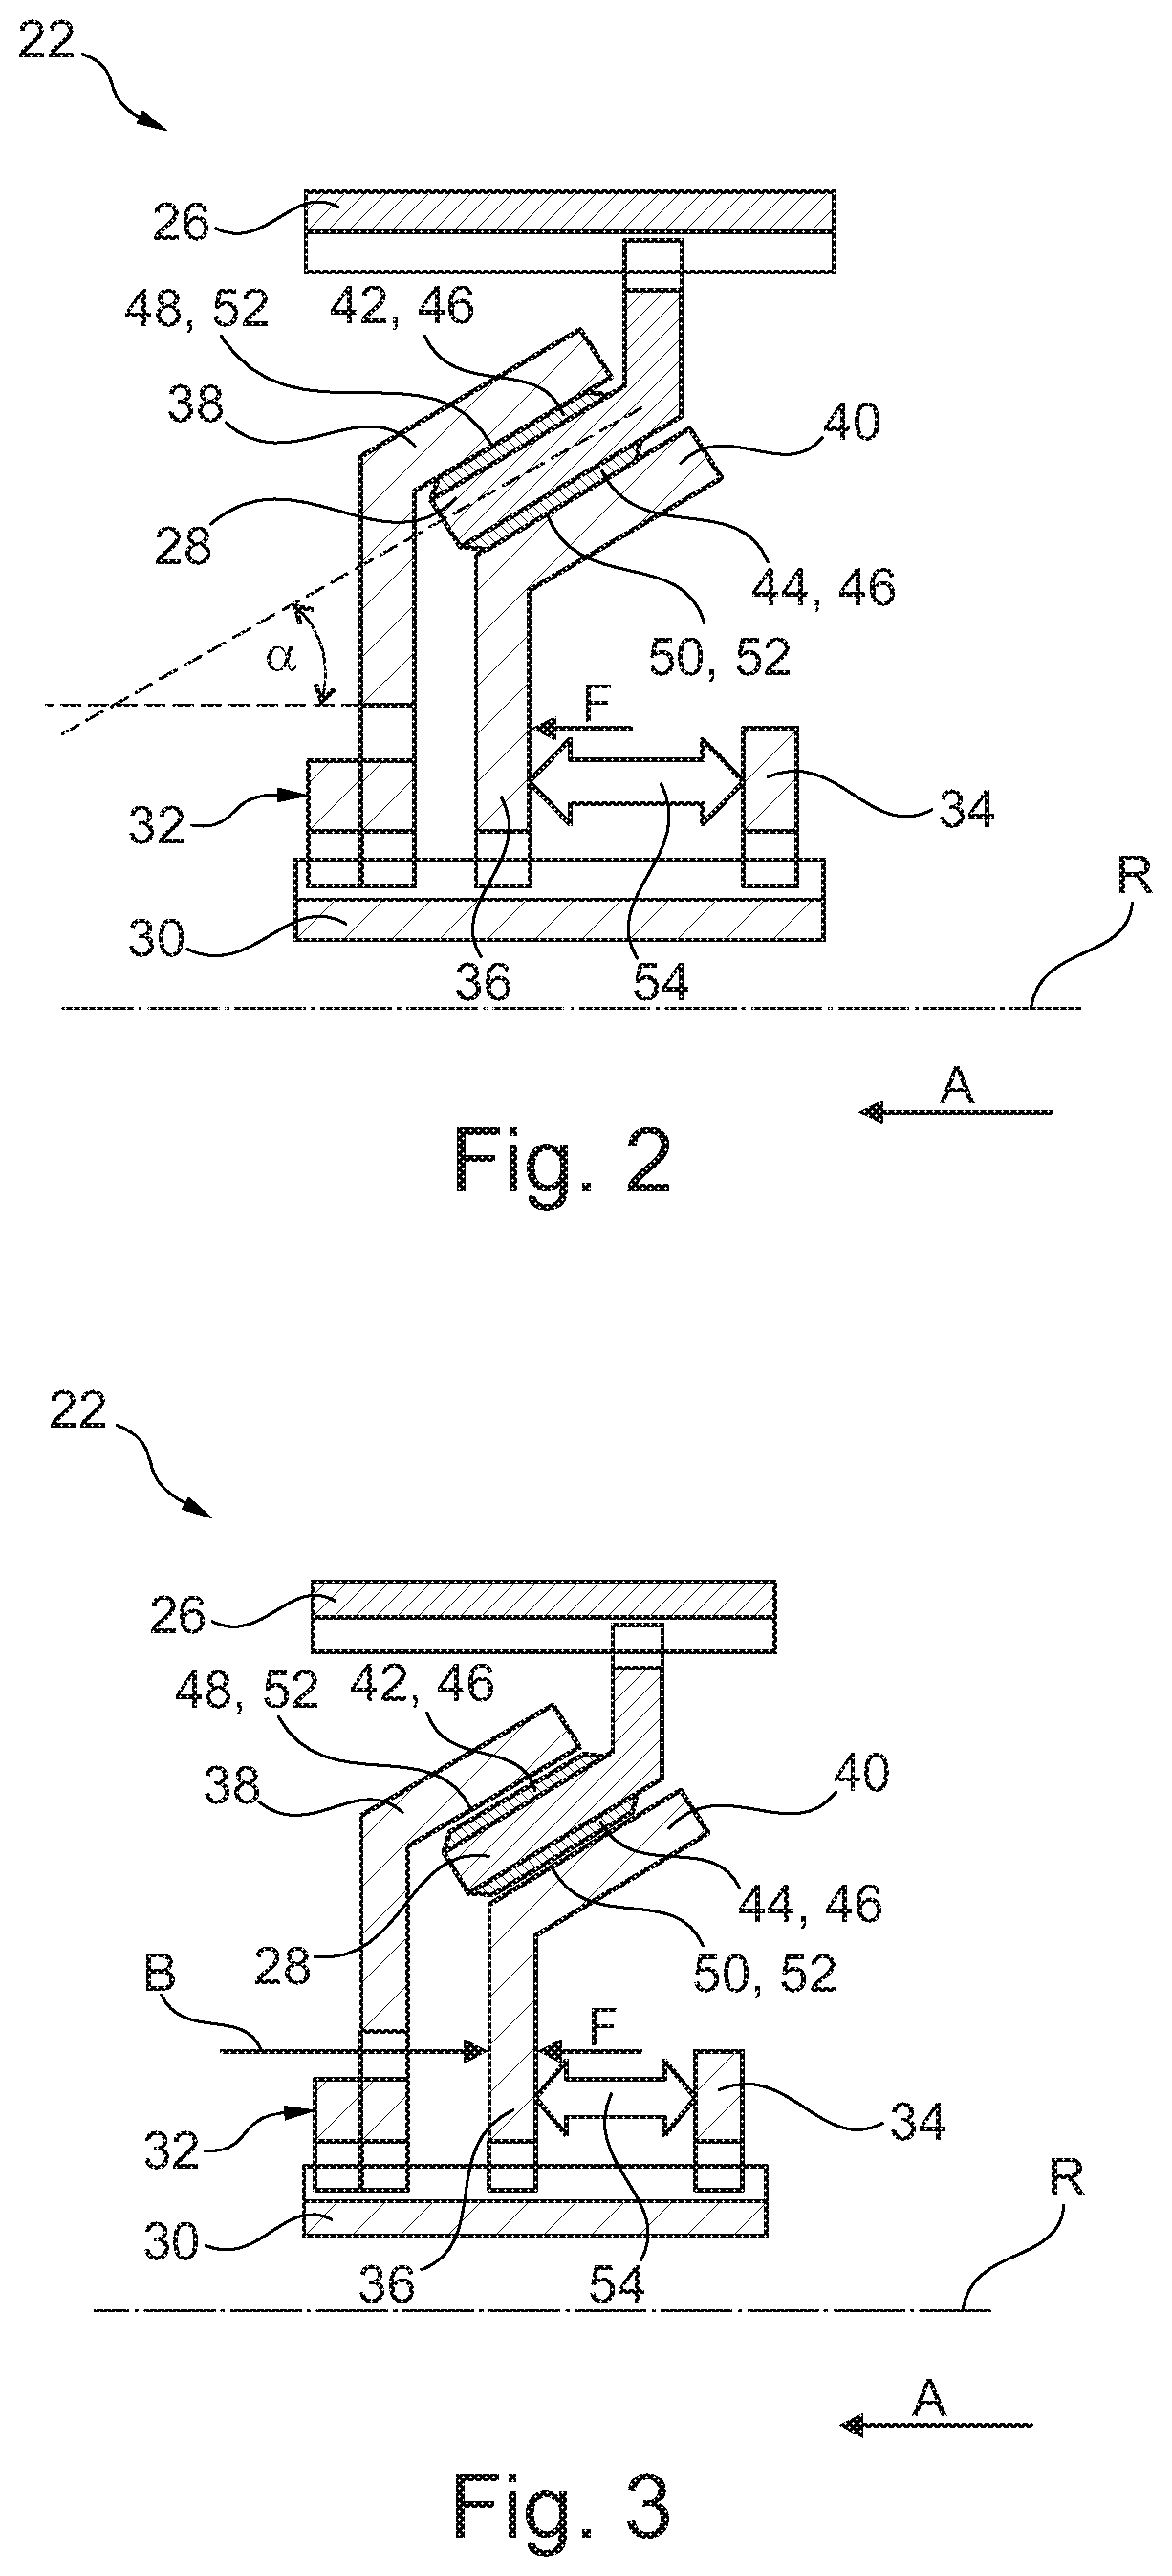 Drivetrain of an electrically driven vehicle and electrically driven vehicle